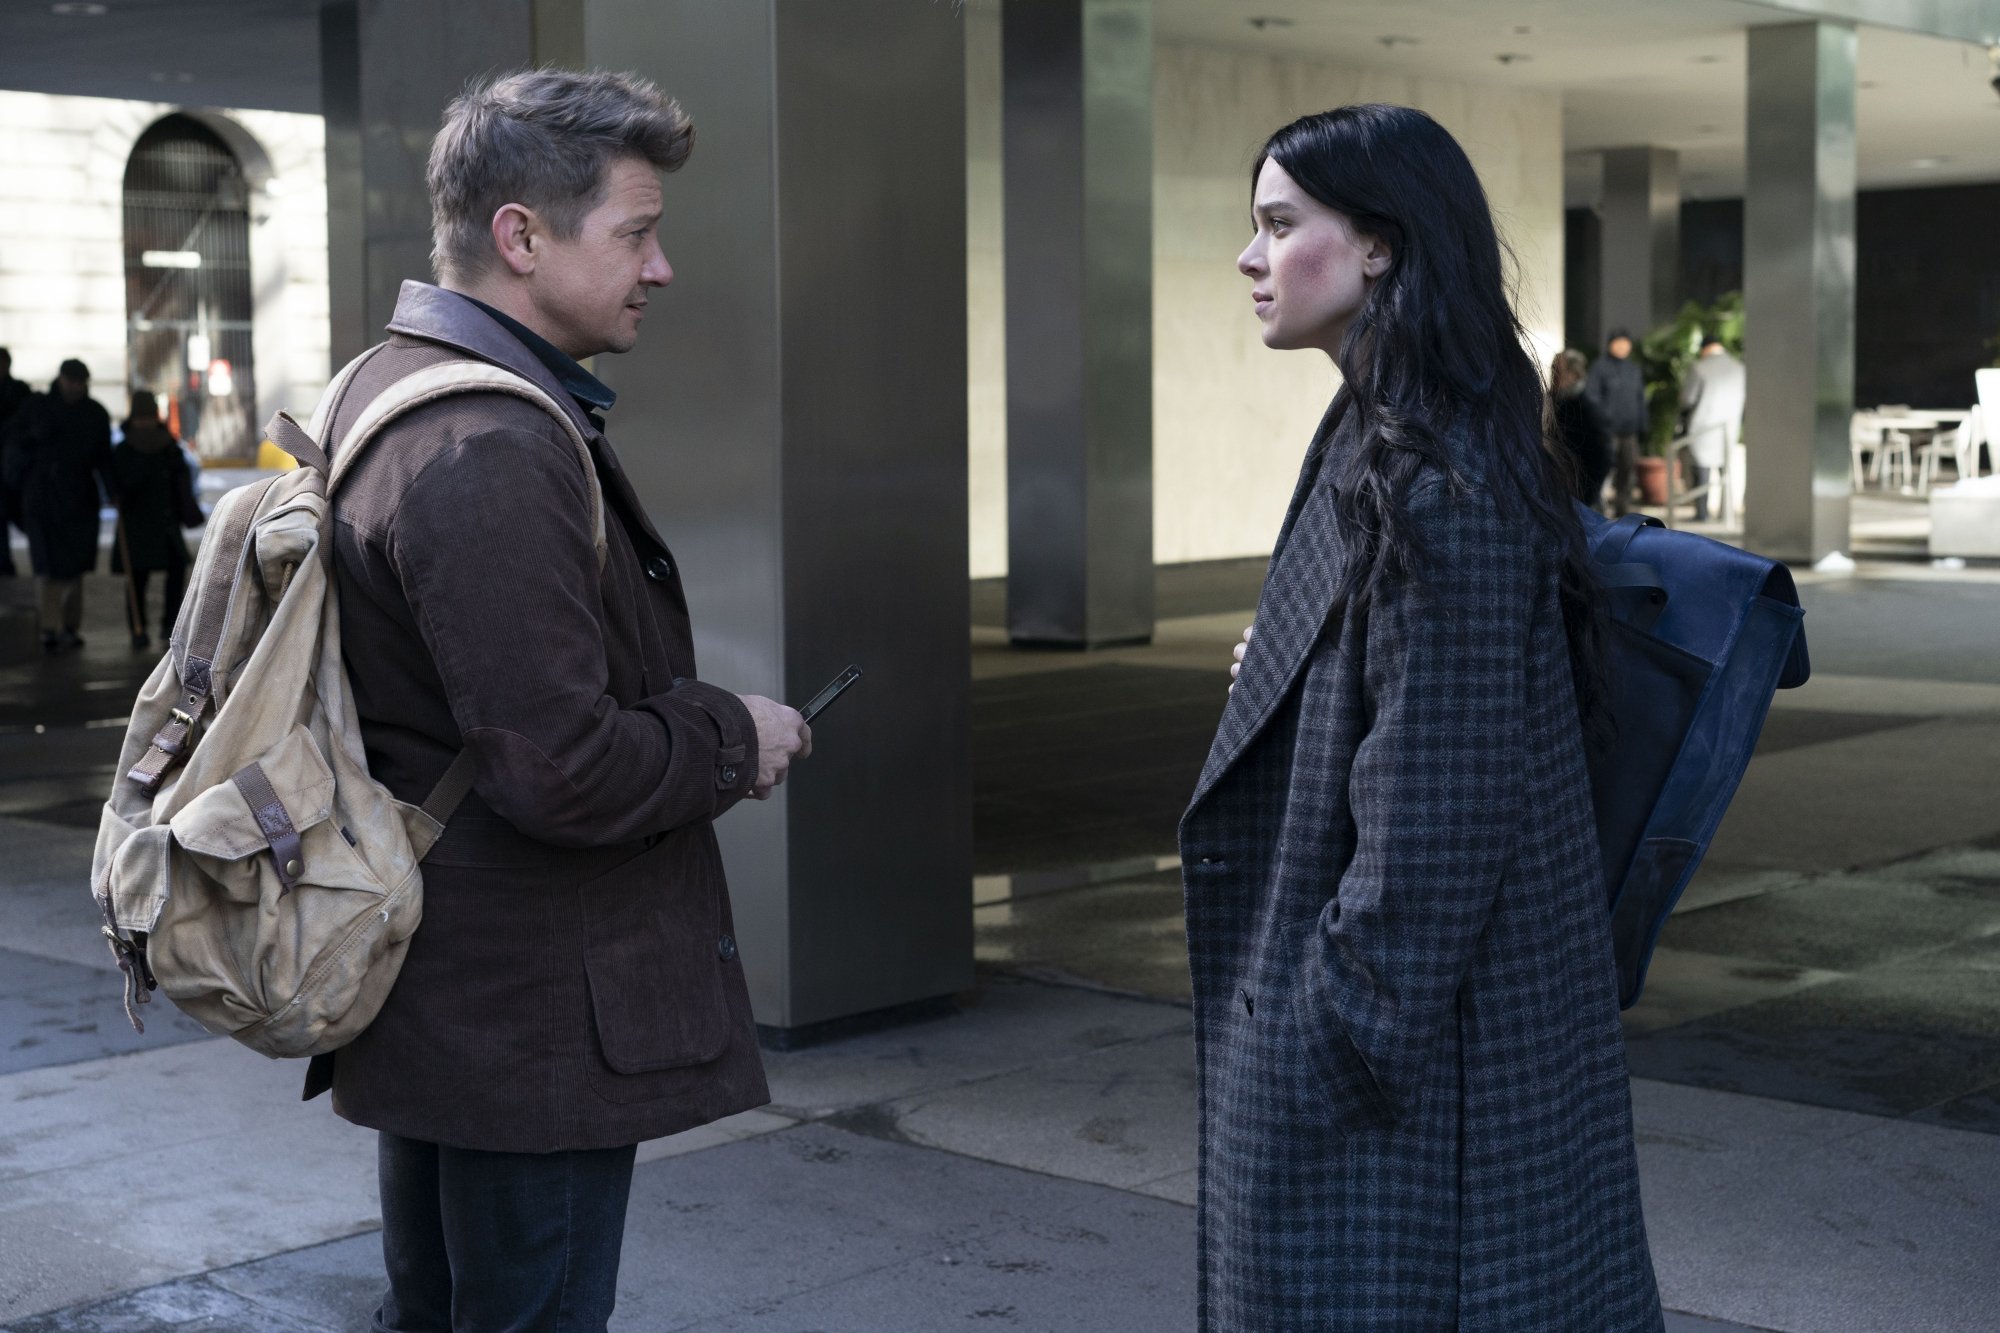 Jeremy Renner and Hailee Steinfeld as Clint Barton and Kate Bishop in Marvel's 'Hawkeye' show on Disney+. They're facing one another on a sidewalk in New York City.